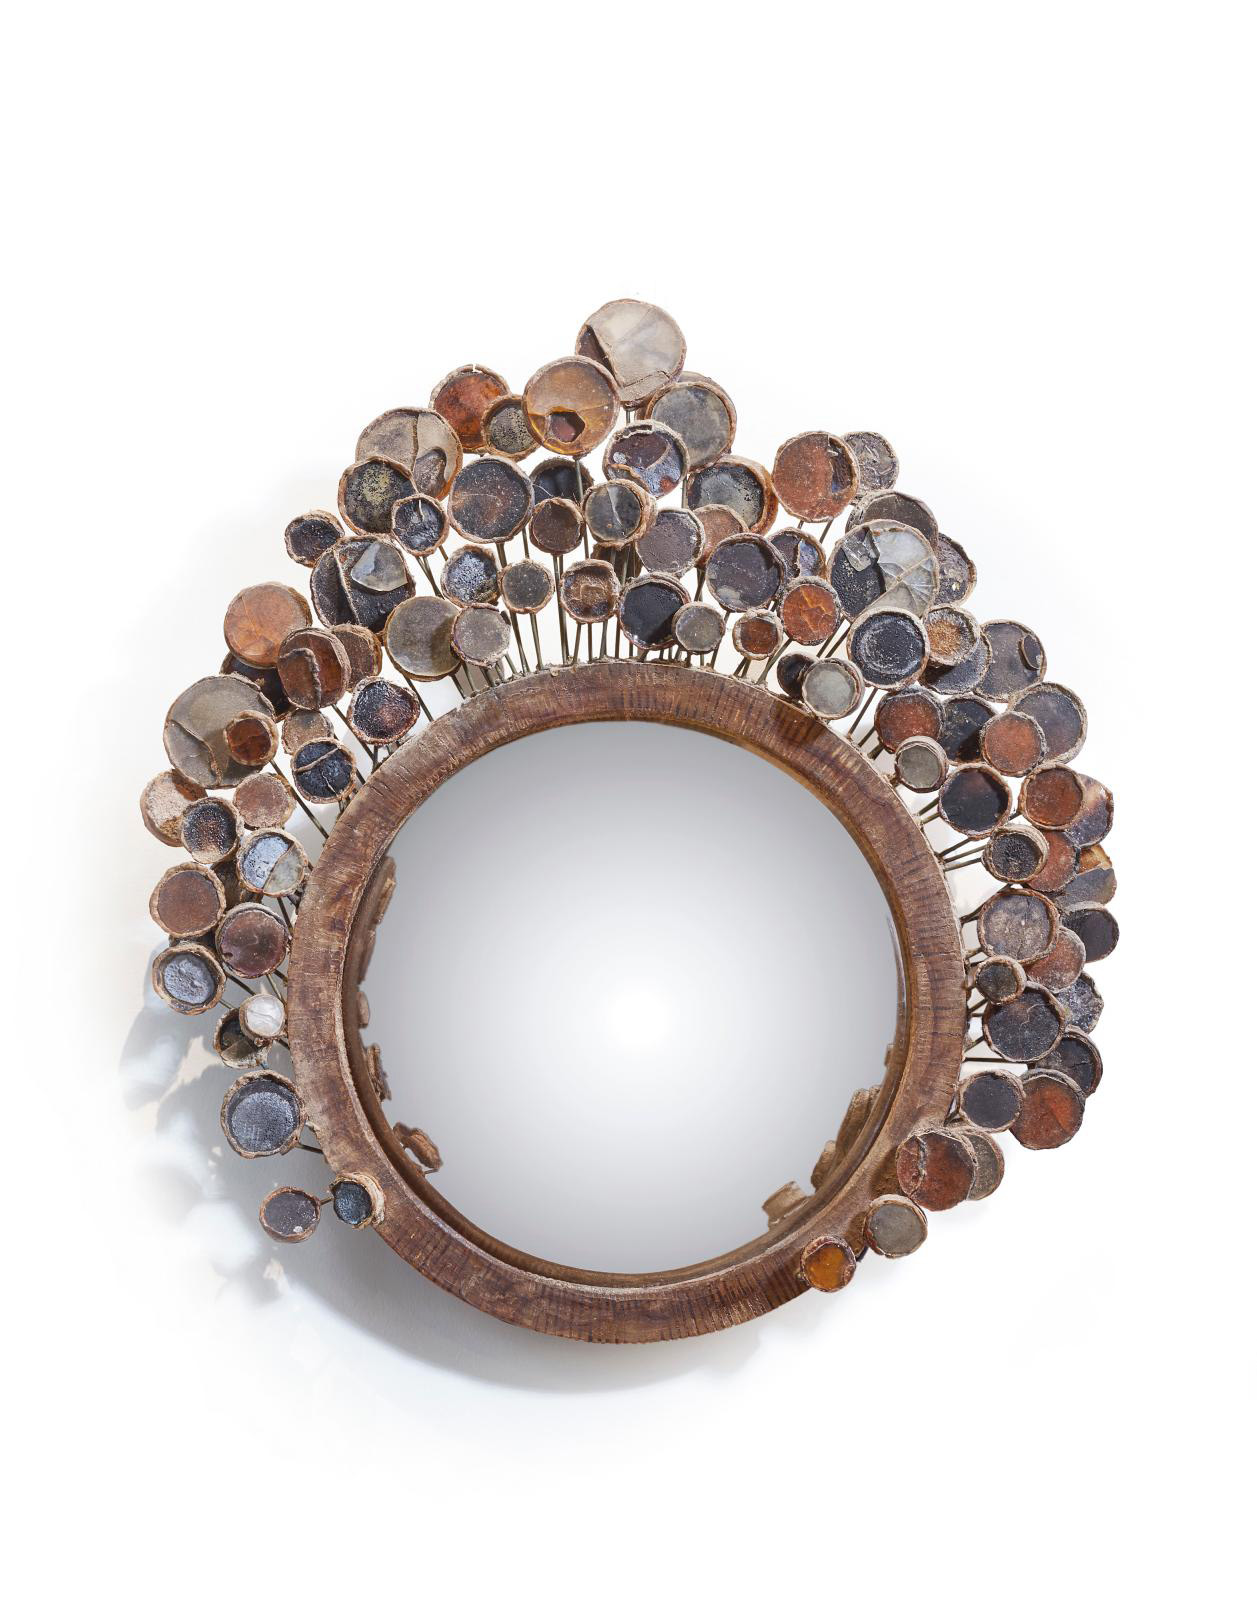 Line Vautrin (1913-1997), "Perruques" model convex mirror, large version, 1960s, in beige hot embossed talosel with mirrors, original conv